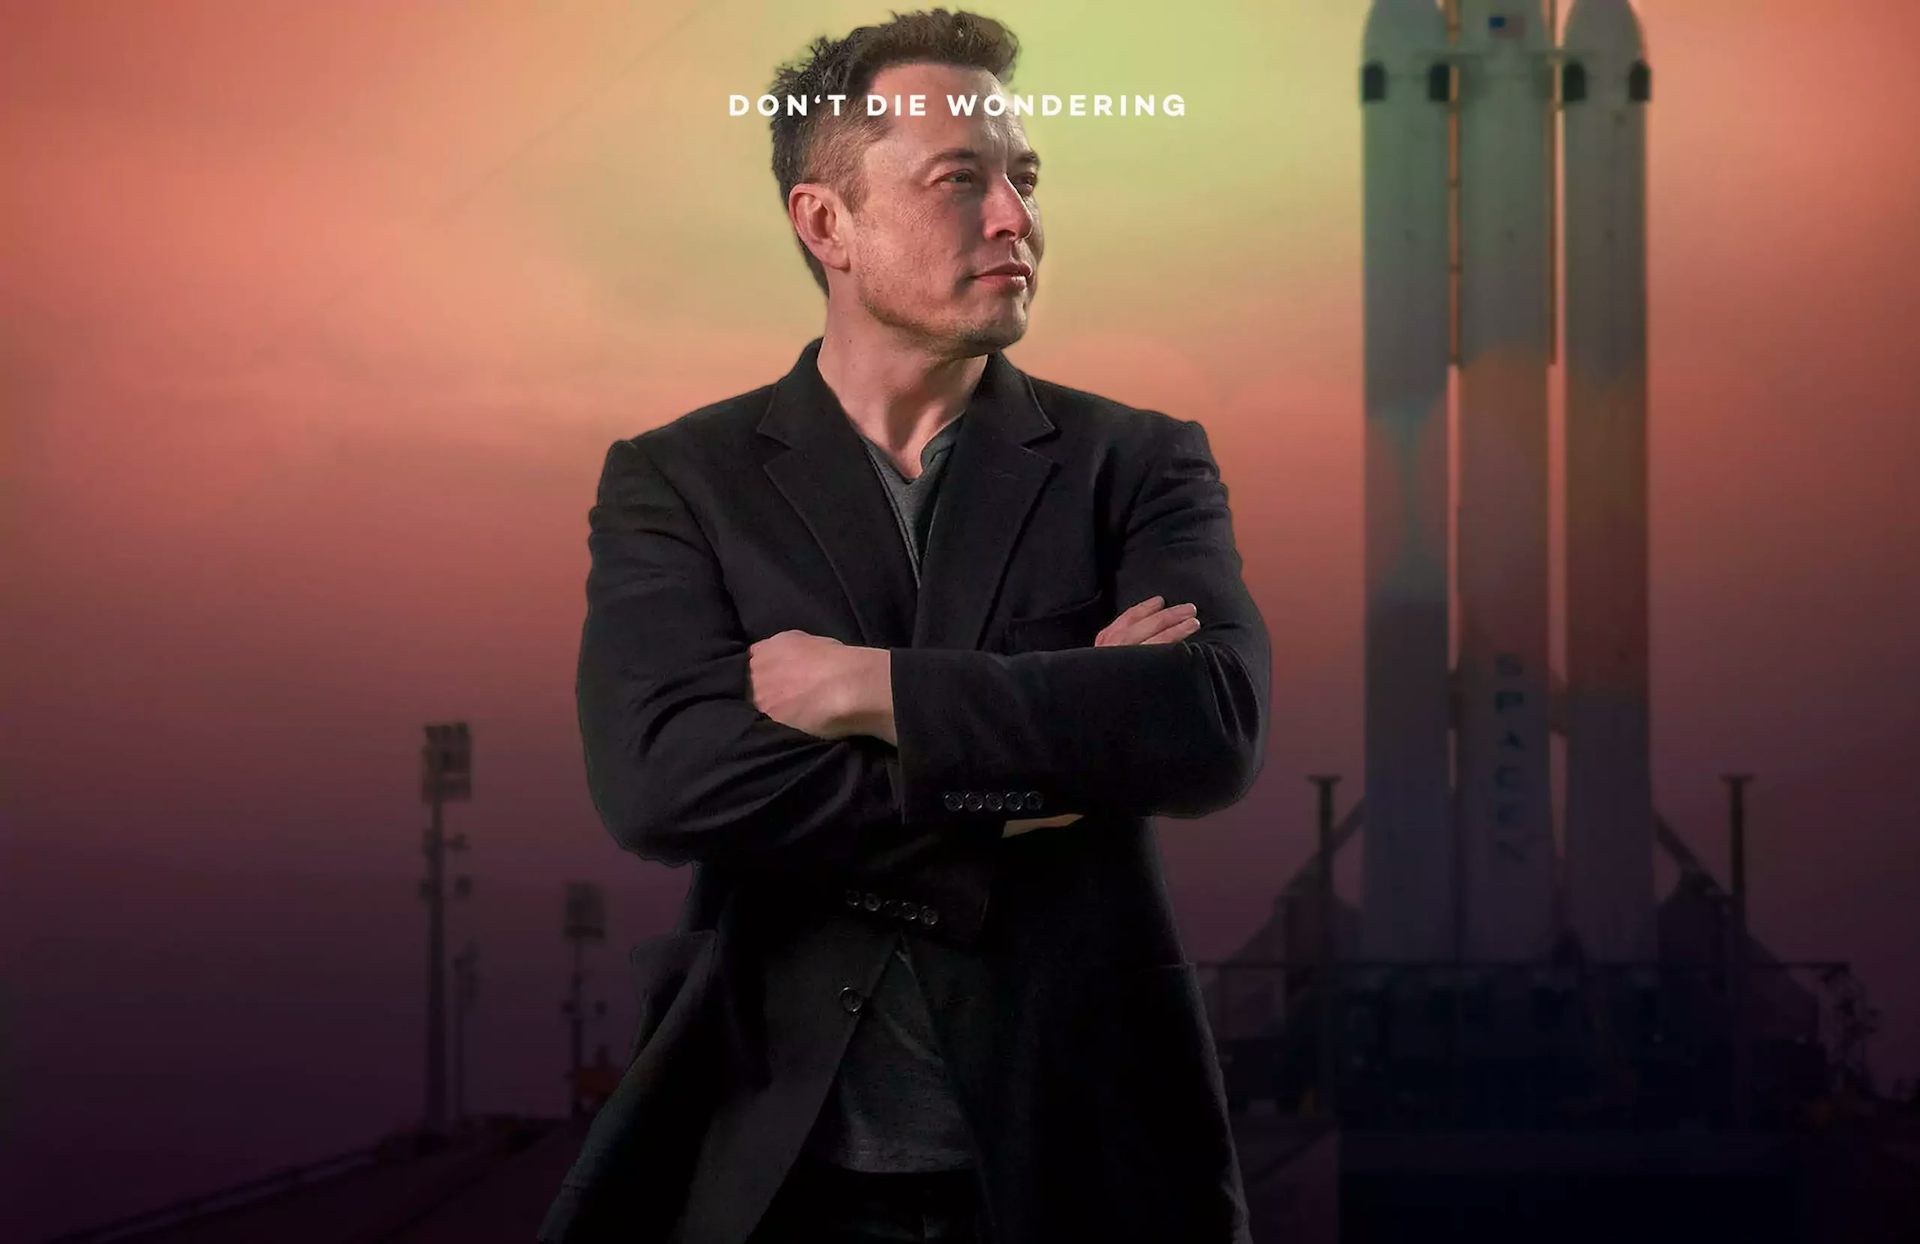 Elon Musk Is Tweeting Mad, Sipping Bubbly And Living The Digital Dream